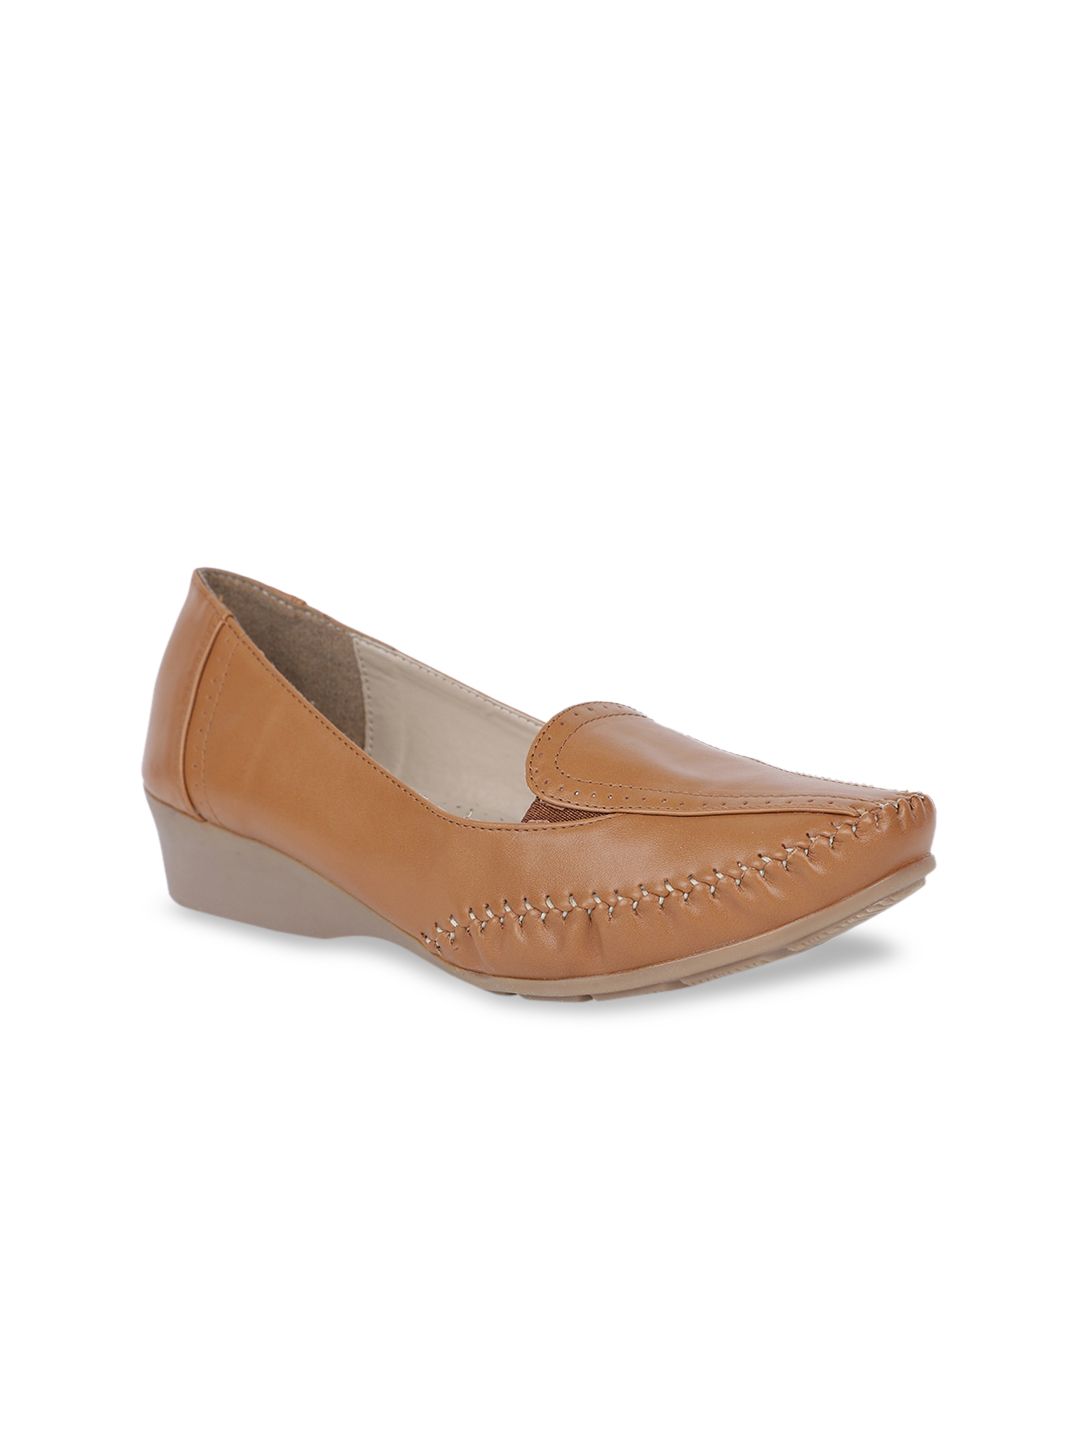 Bata Women Brown Loafers Price in India